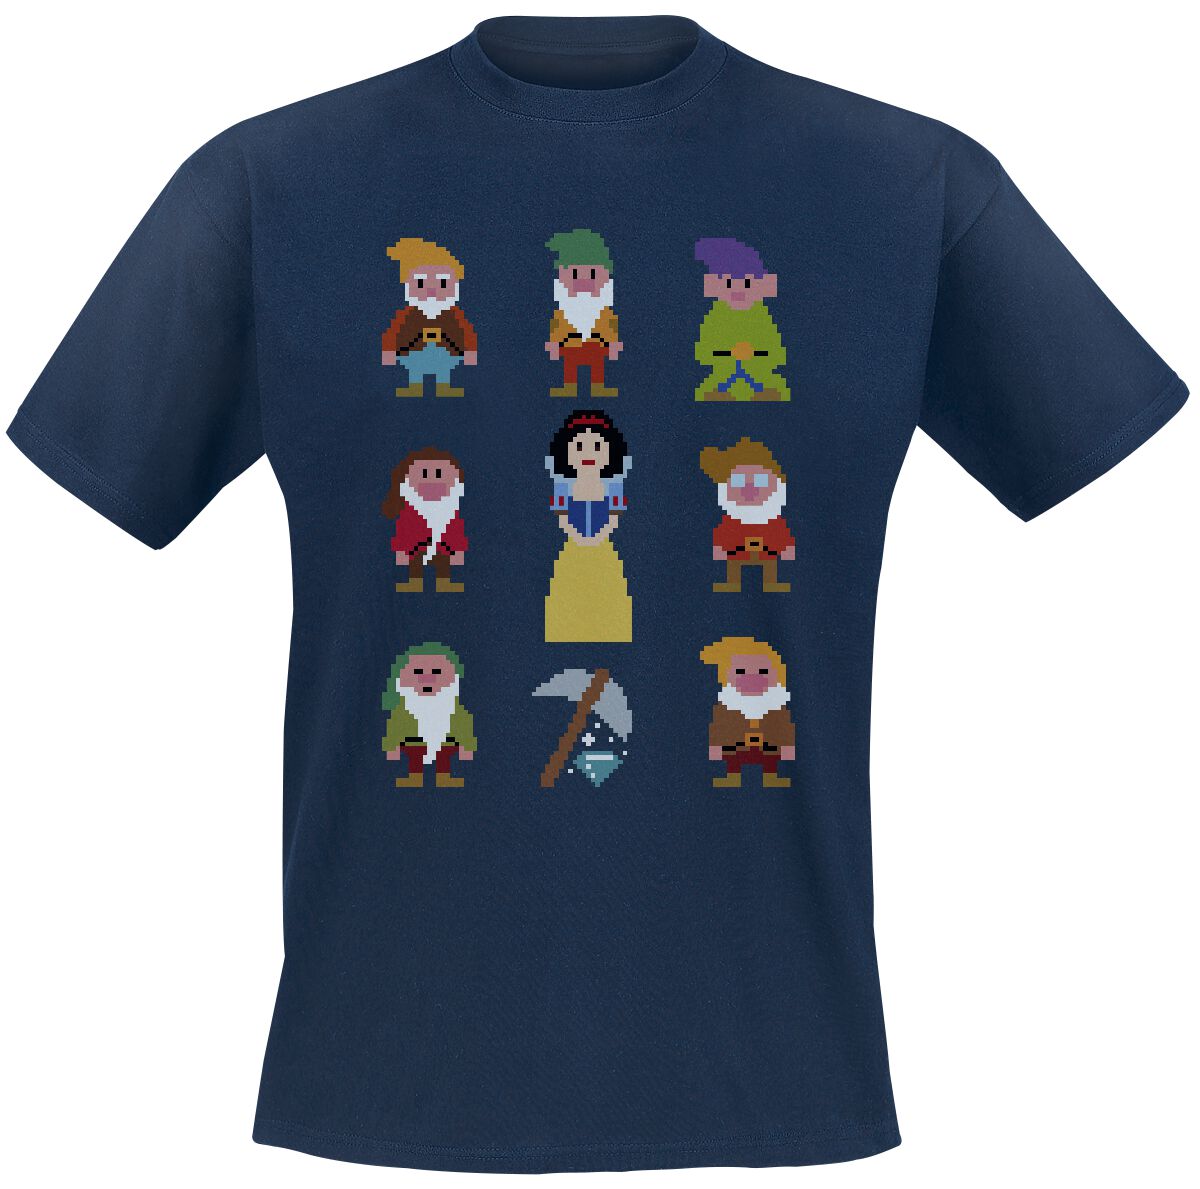 Snow White and the Seven Dwarfs Snow White and the Seven Dwarfs  - Pixel Group Photo T-Shirt blue